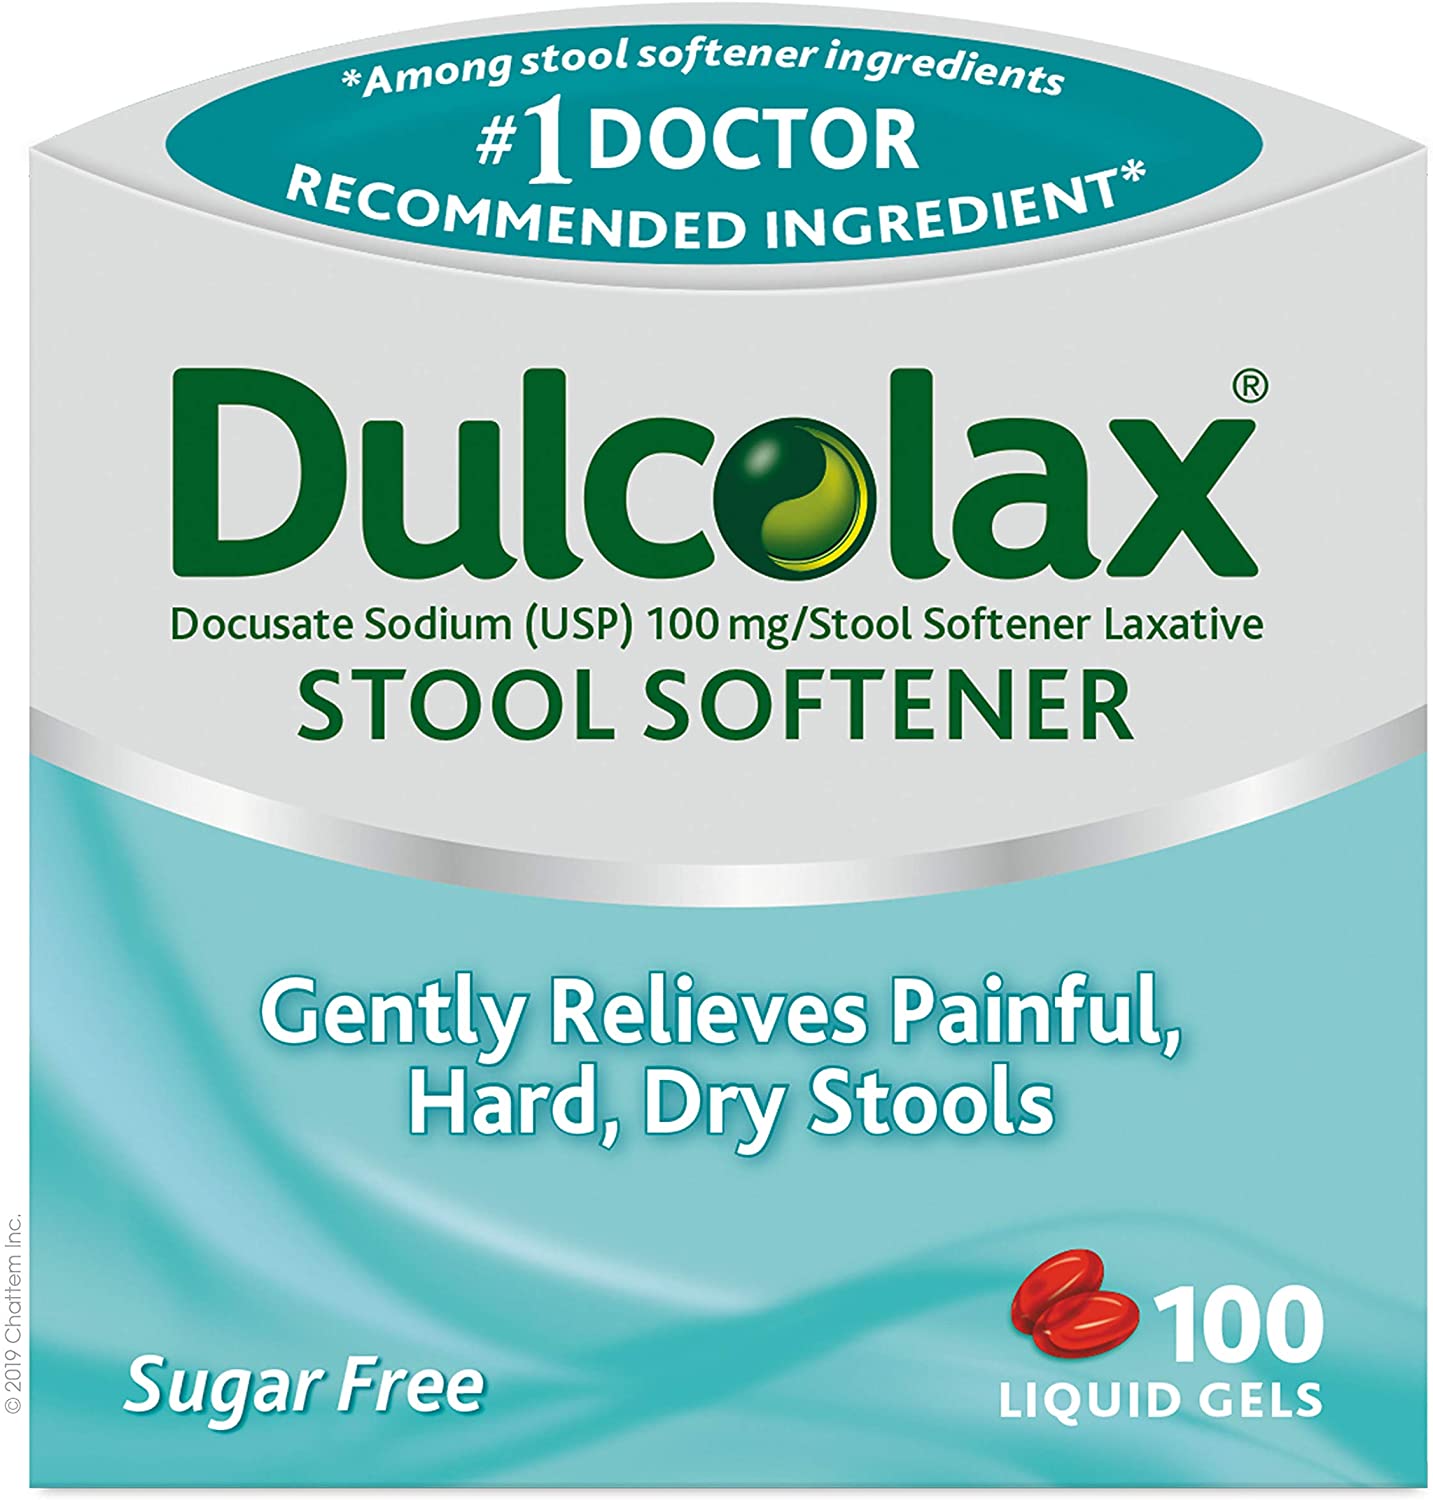 Dulcolax Constipation-Free Doctor Recommended Stool Softener